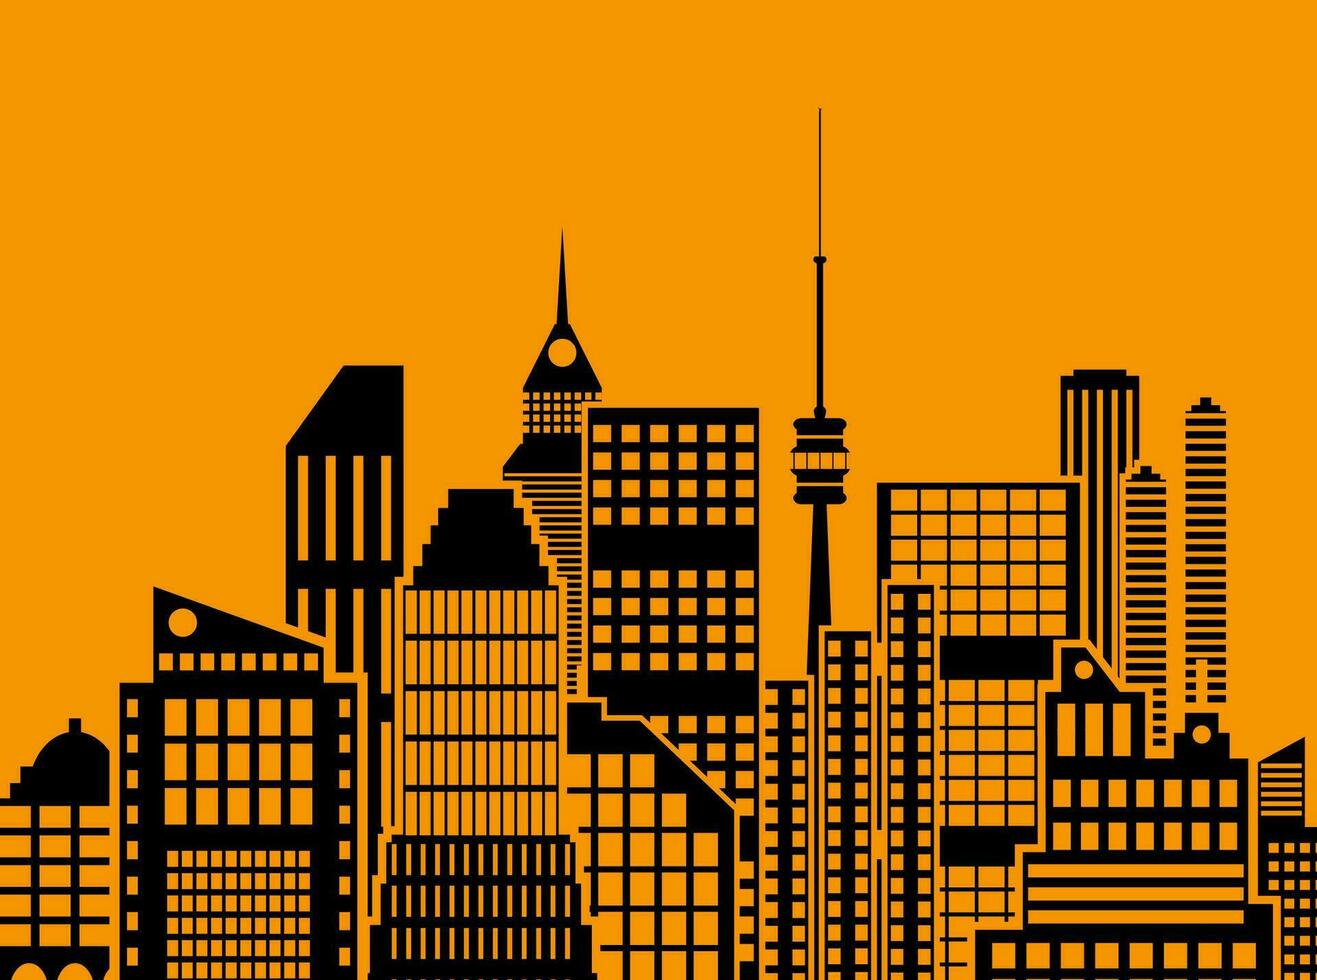 Modern City View. Cityscape with office and residental buildings, television tower, orange and black color. vector illustration in flat style